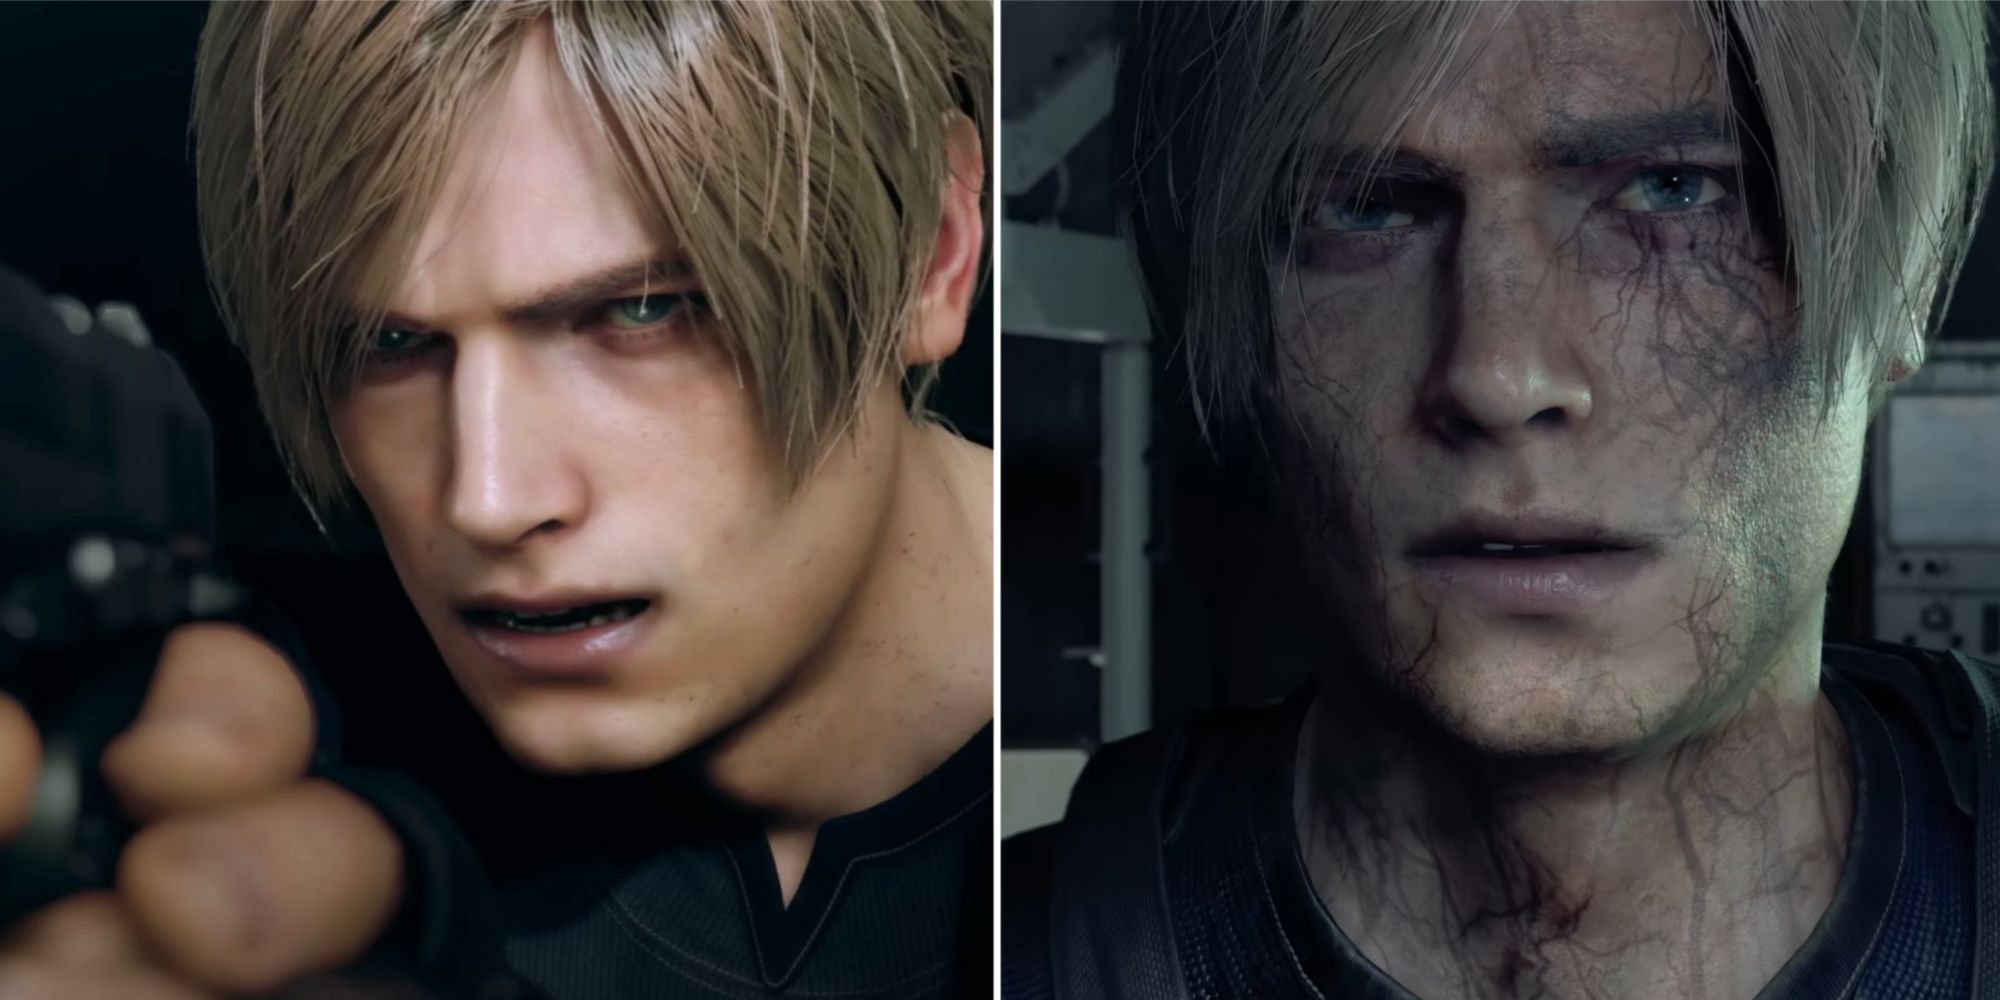 A side-by-side of Leon aiming a gun with his normal looking face, and then his Plaga infected face on the left.